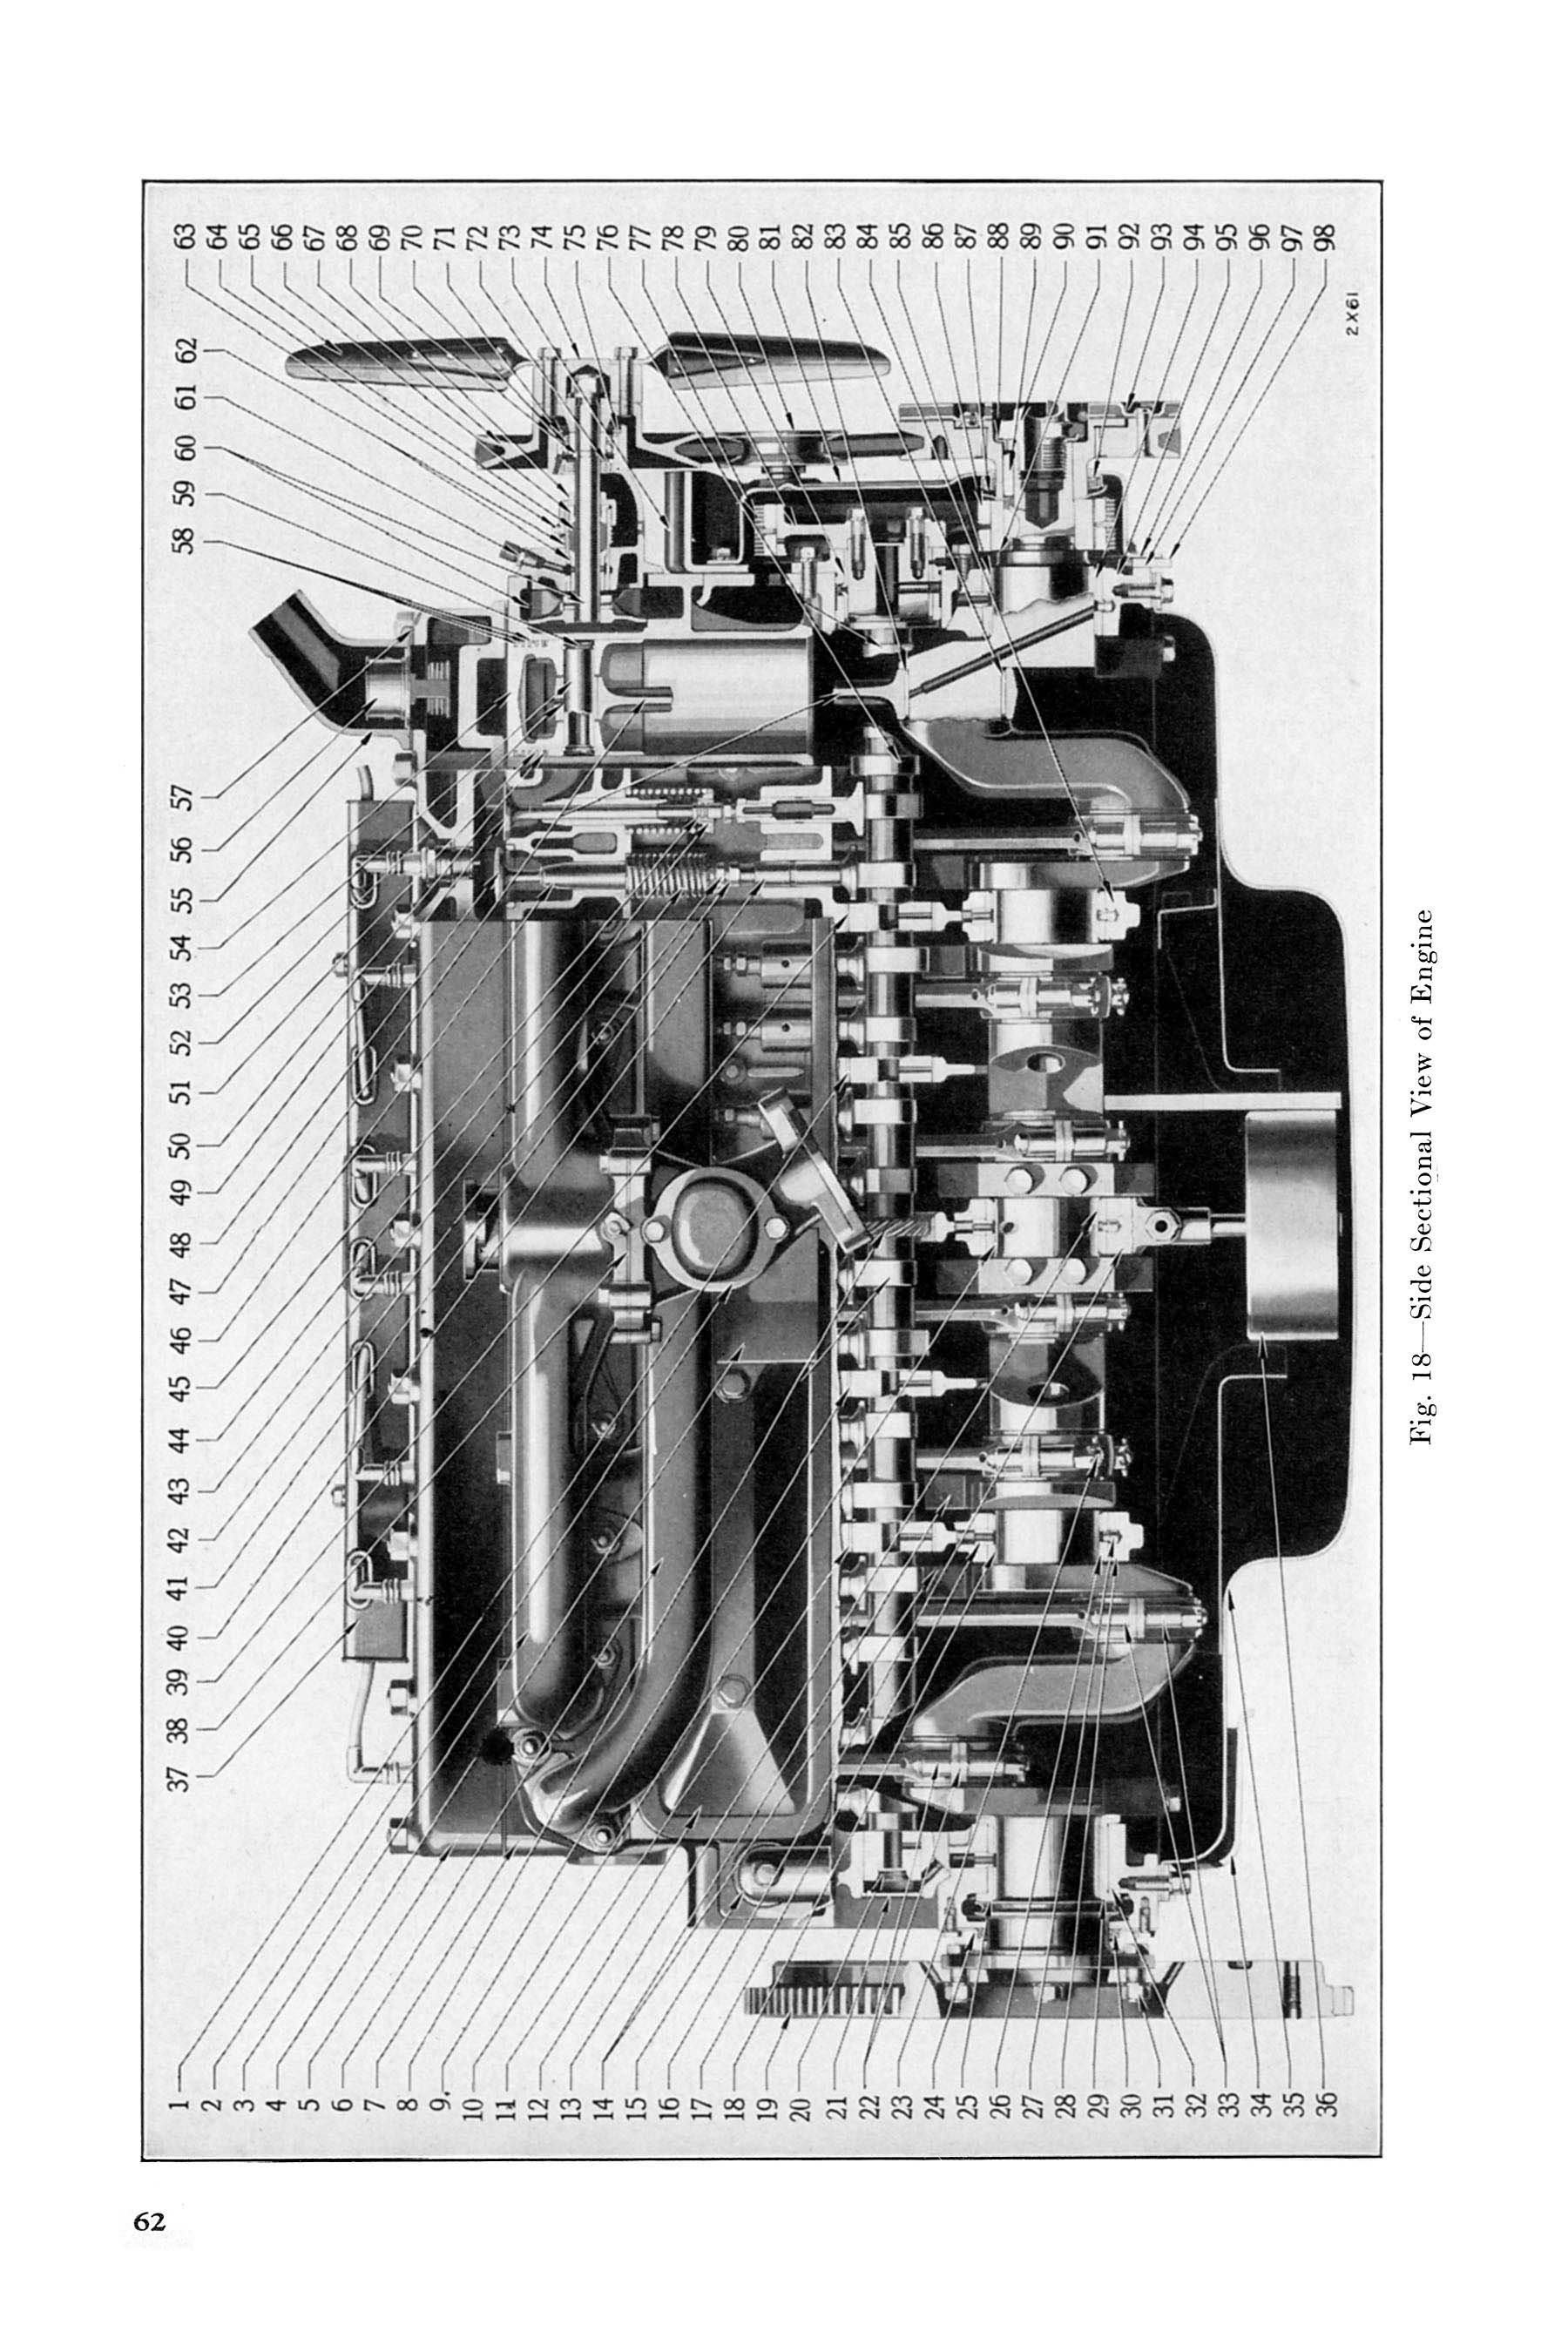 1933 Imperial Instruction Book-062